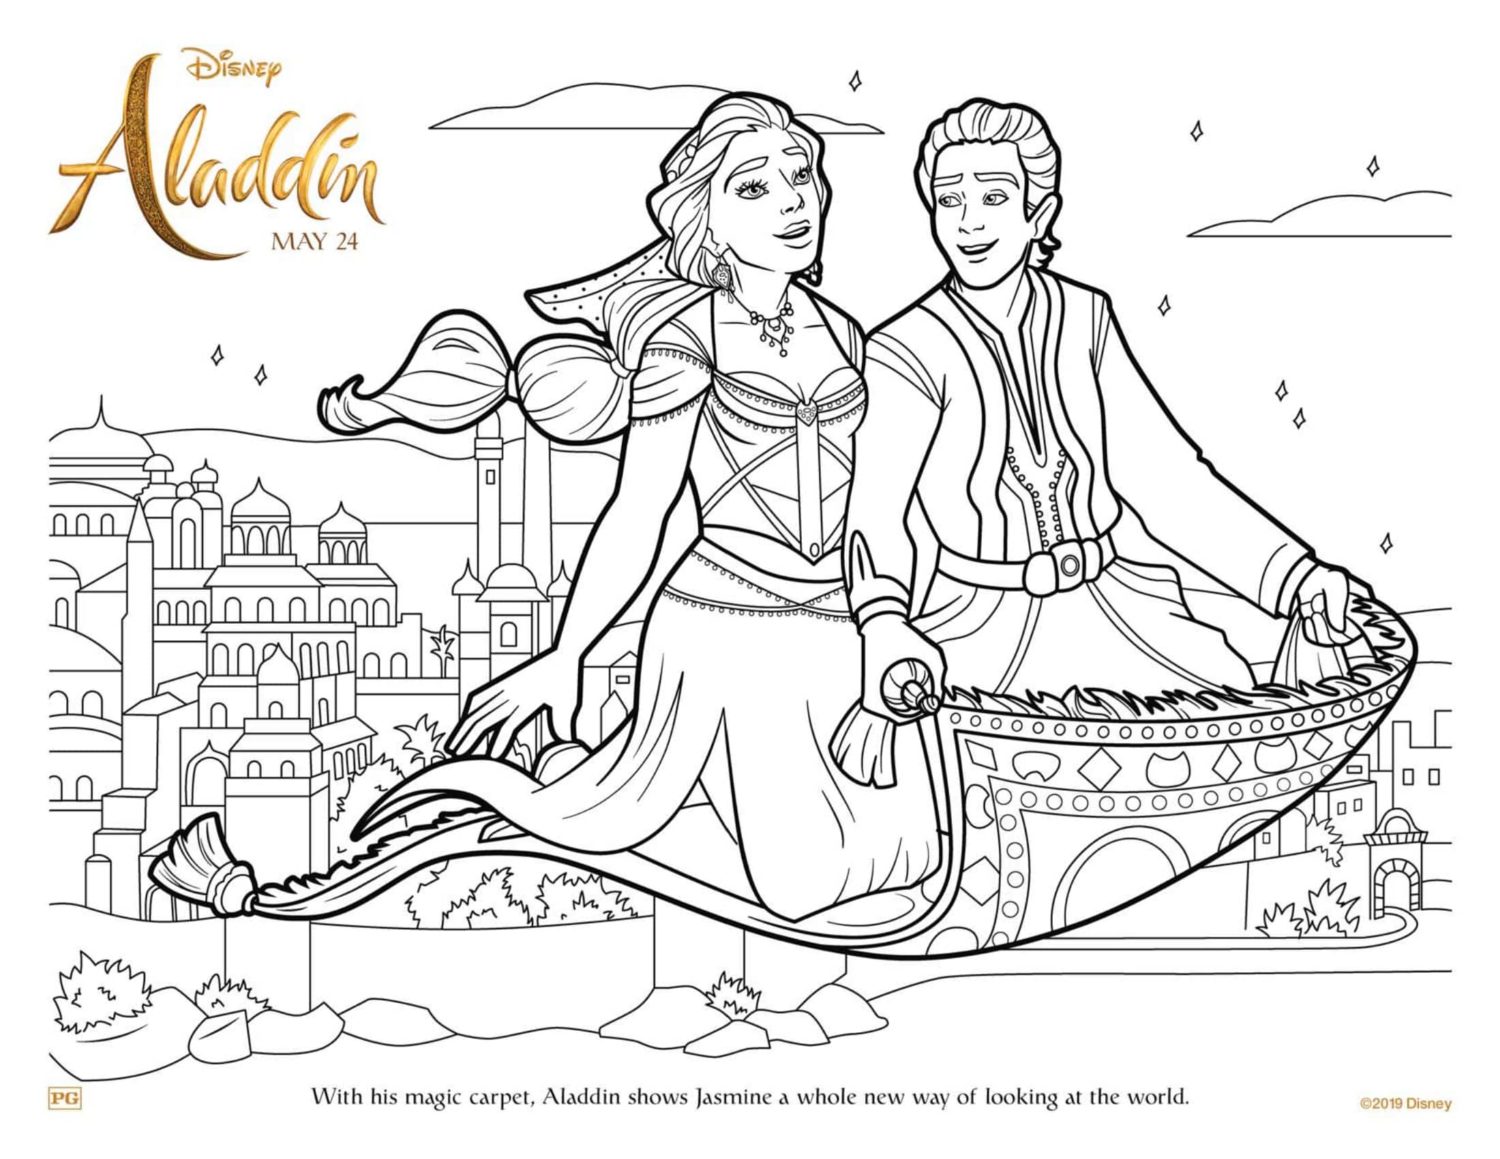 Aladdin and Jasmine Magic Carpet Ride Coloring Page and Activity Sheet